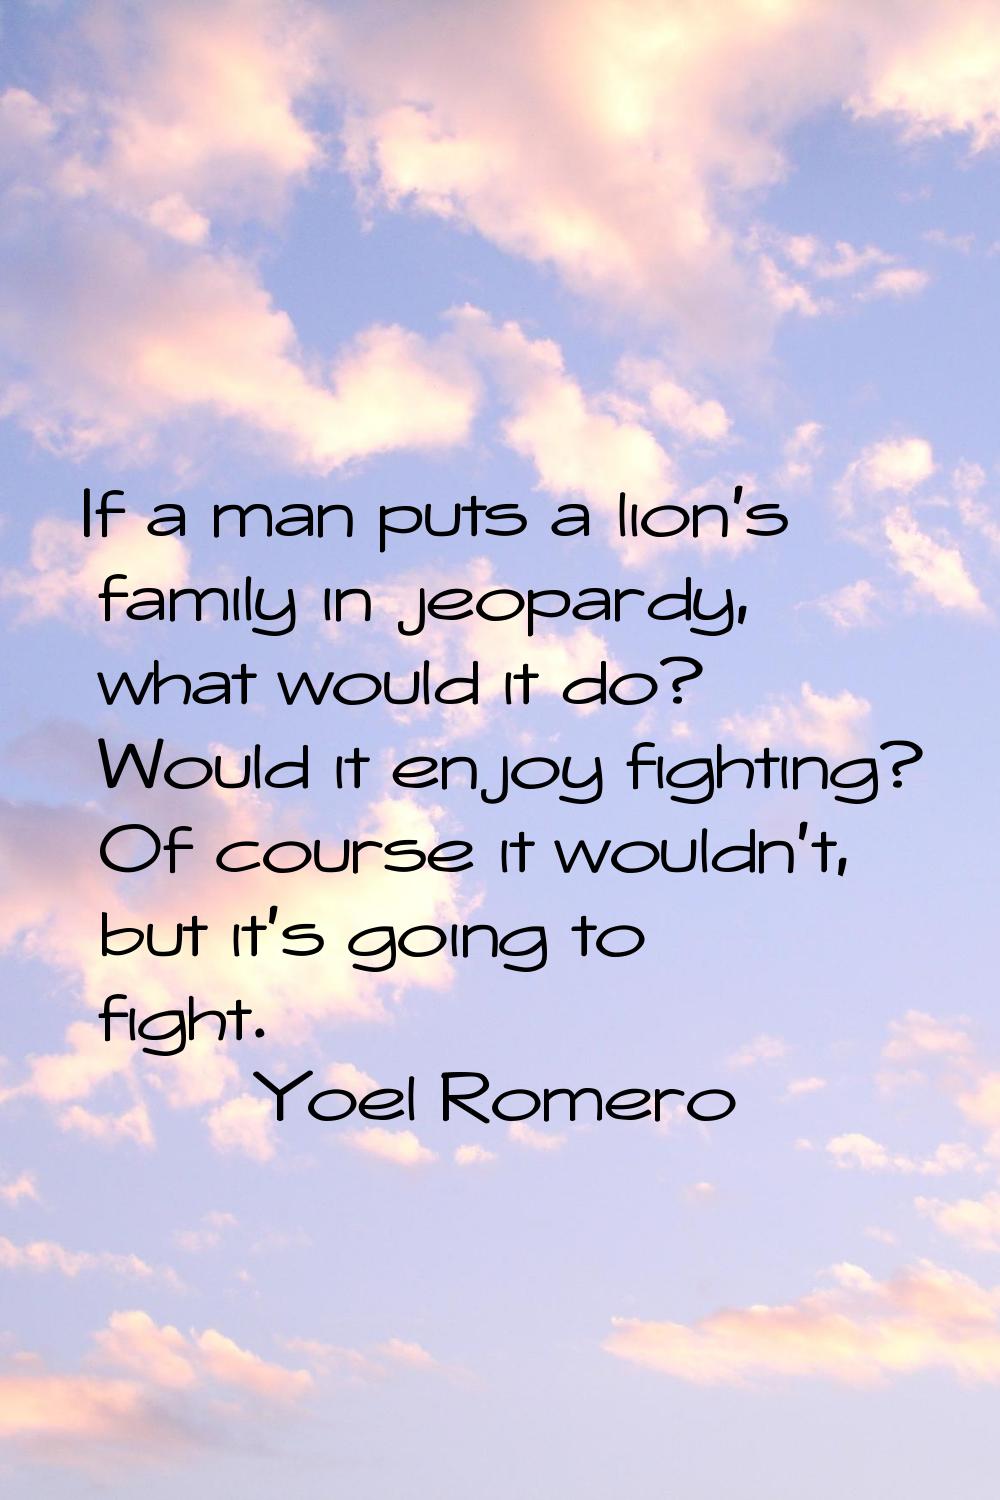 If a man puts a lion's family in jeopardy, what would it do? Would it enjoy fighting? Of course it 